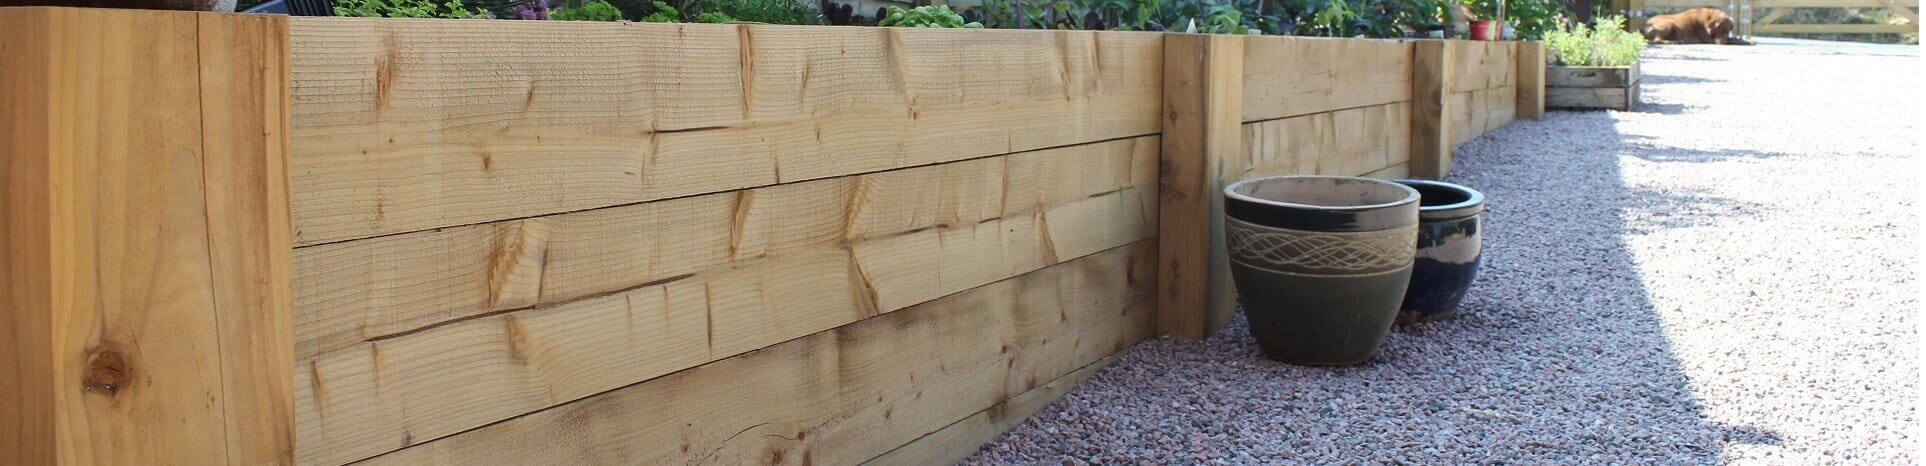 Landscape products wooden sleepers holding plants